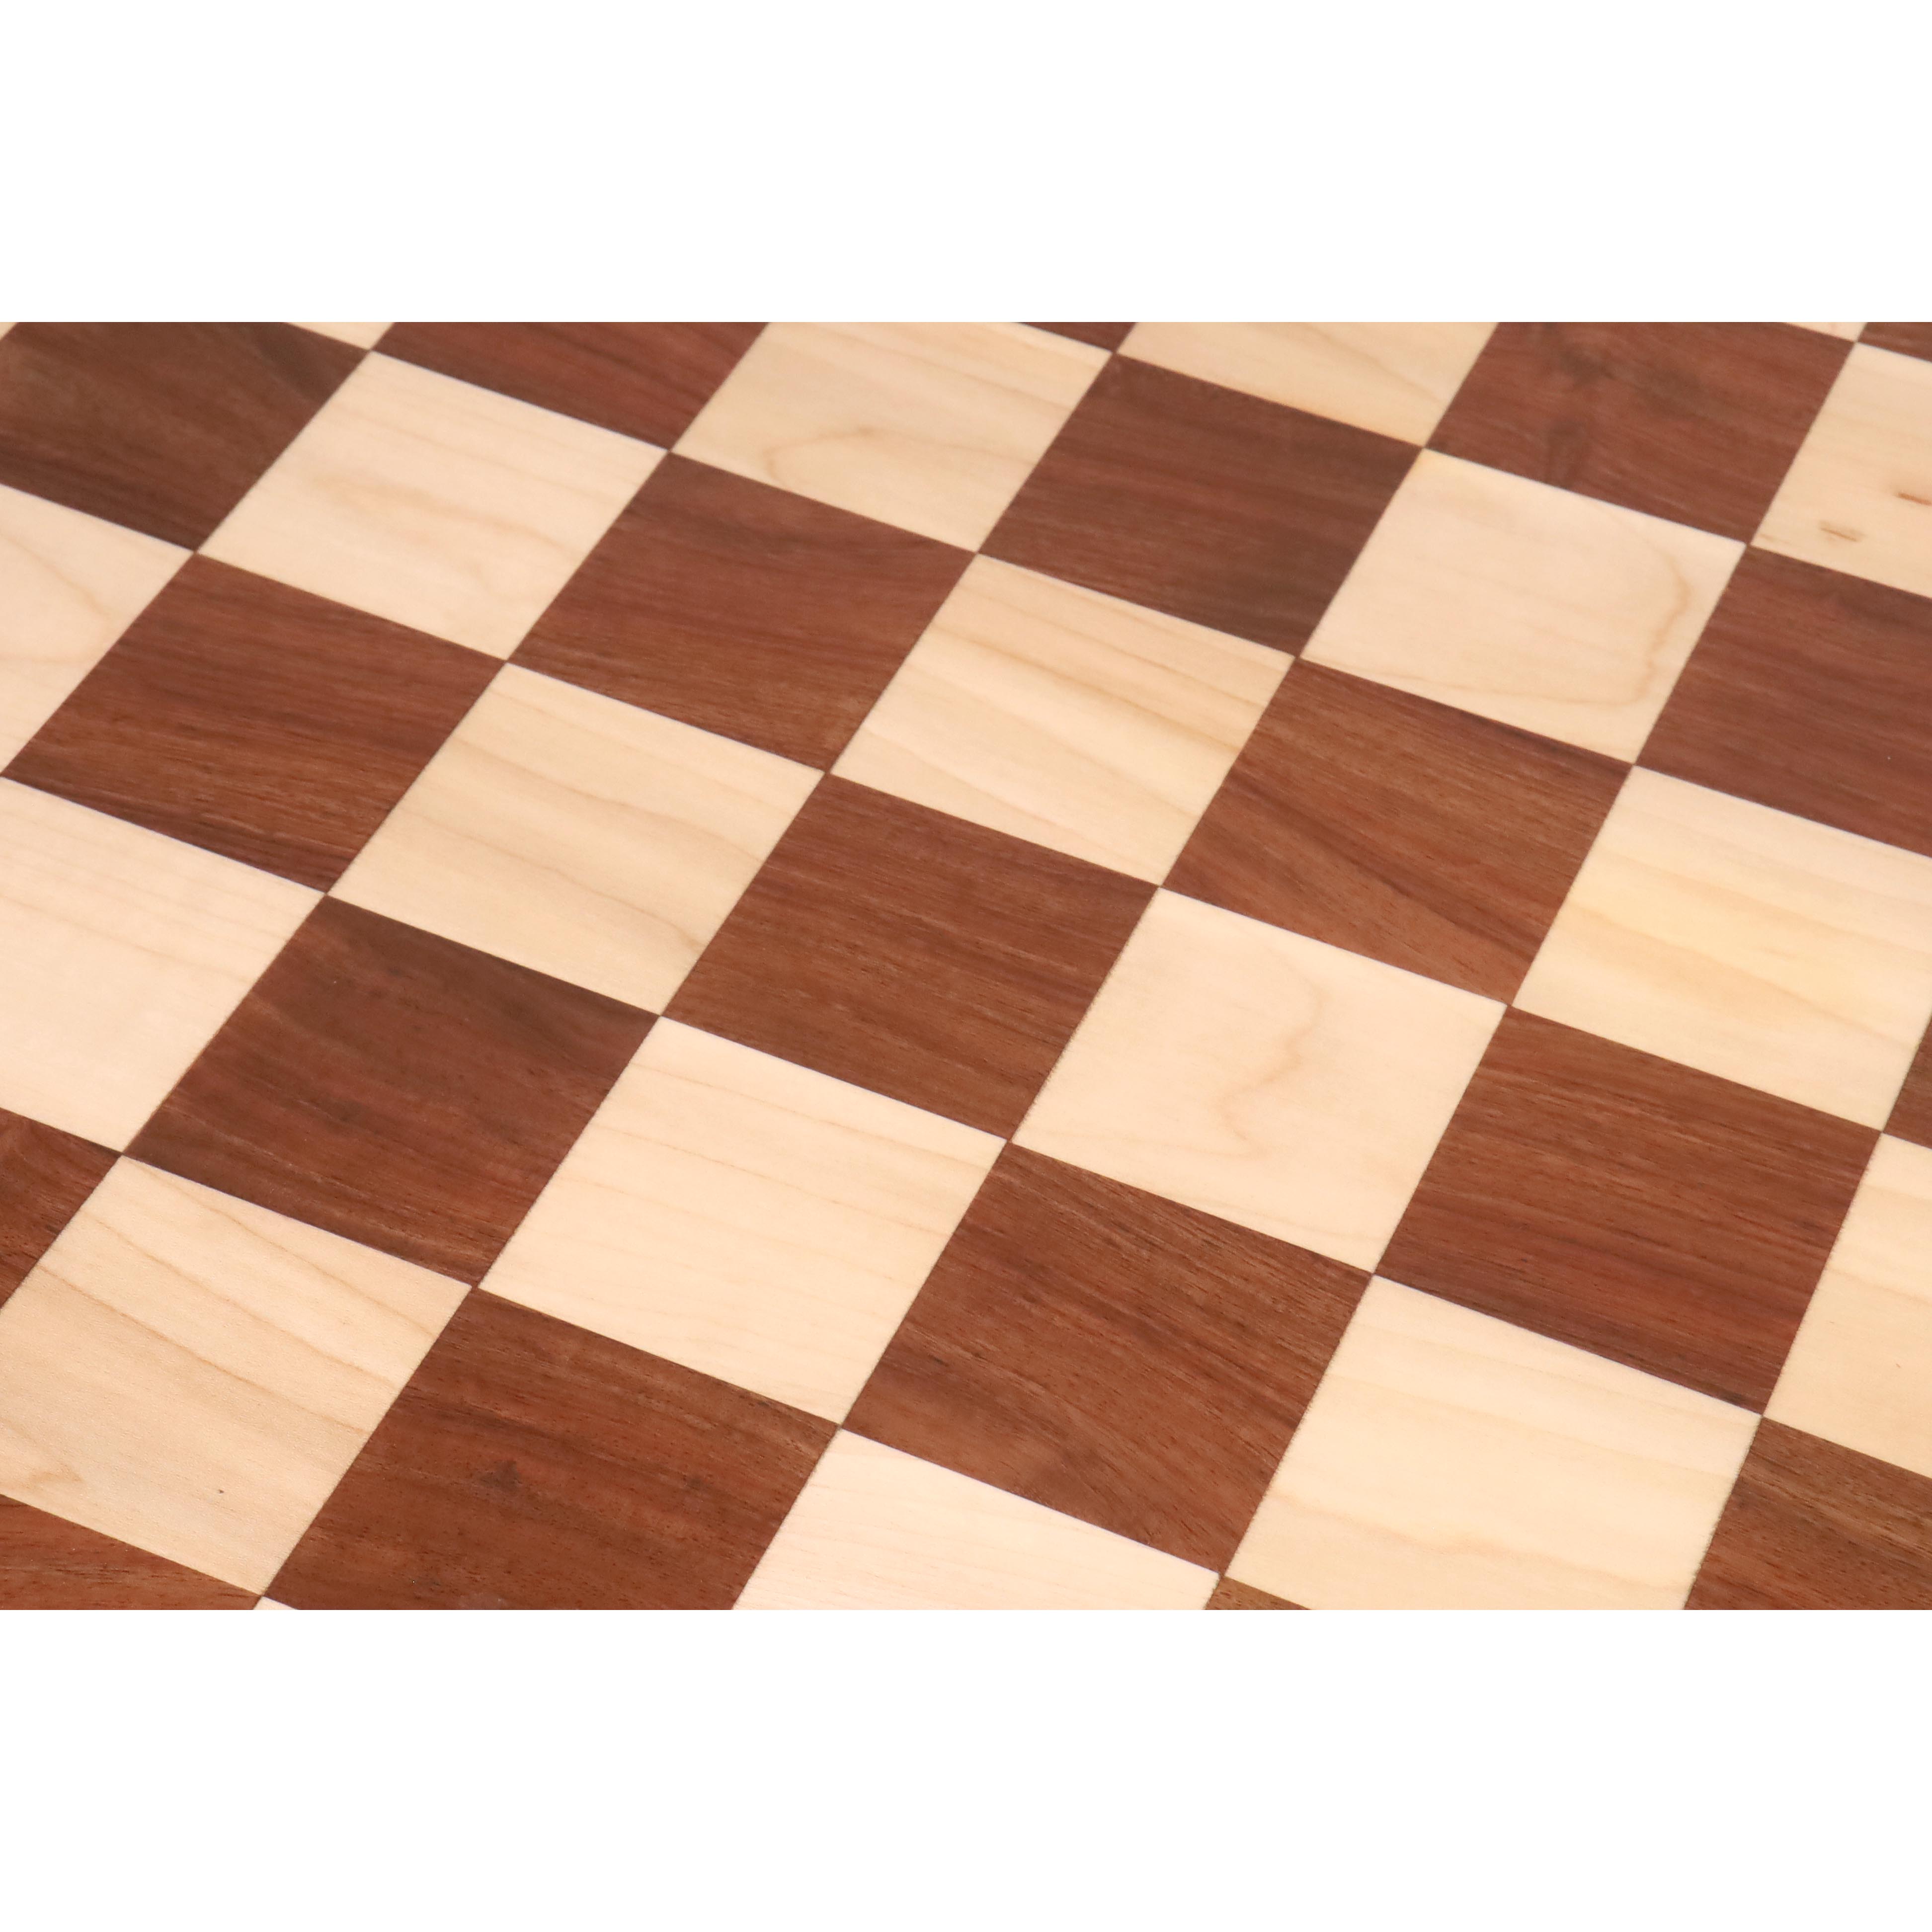 Slightly Imperfect 21" Golden Rosewood & Maple Wood Luxury Chessboard with Teak Border-57 mm Square